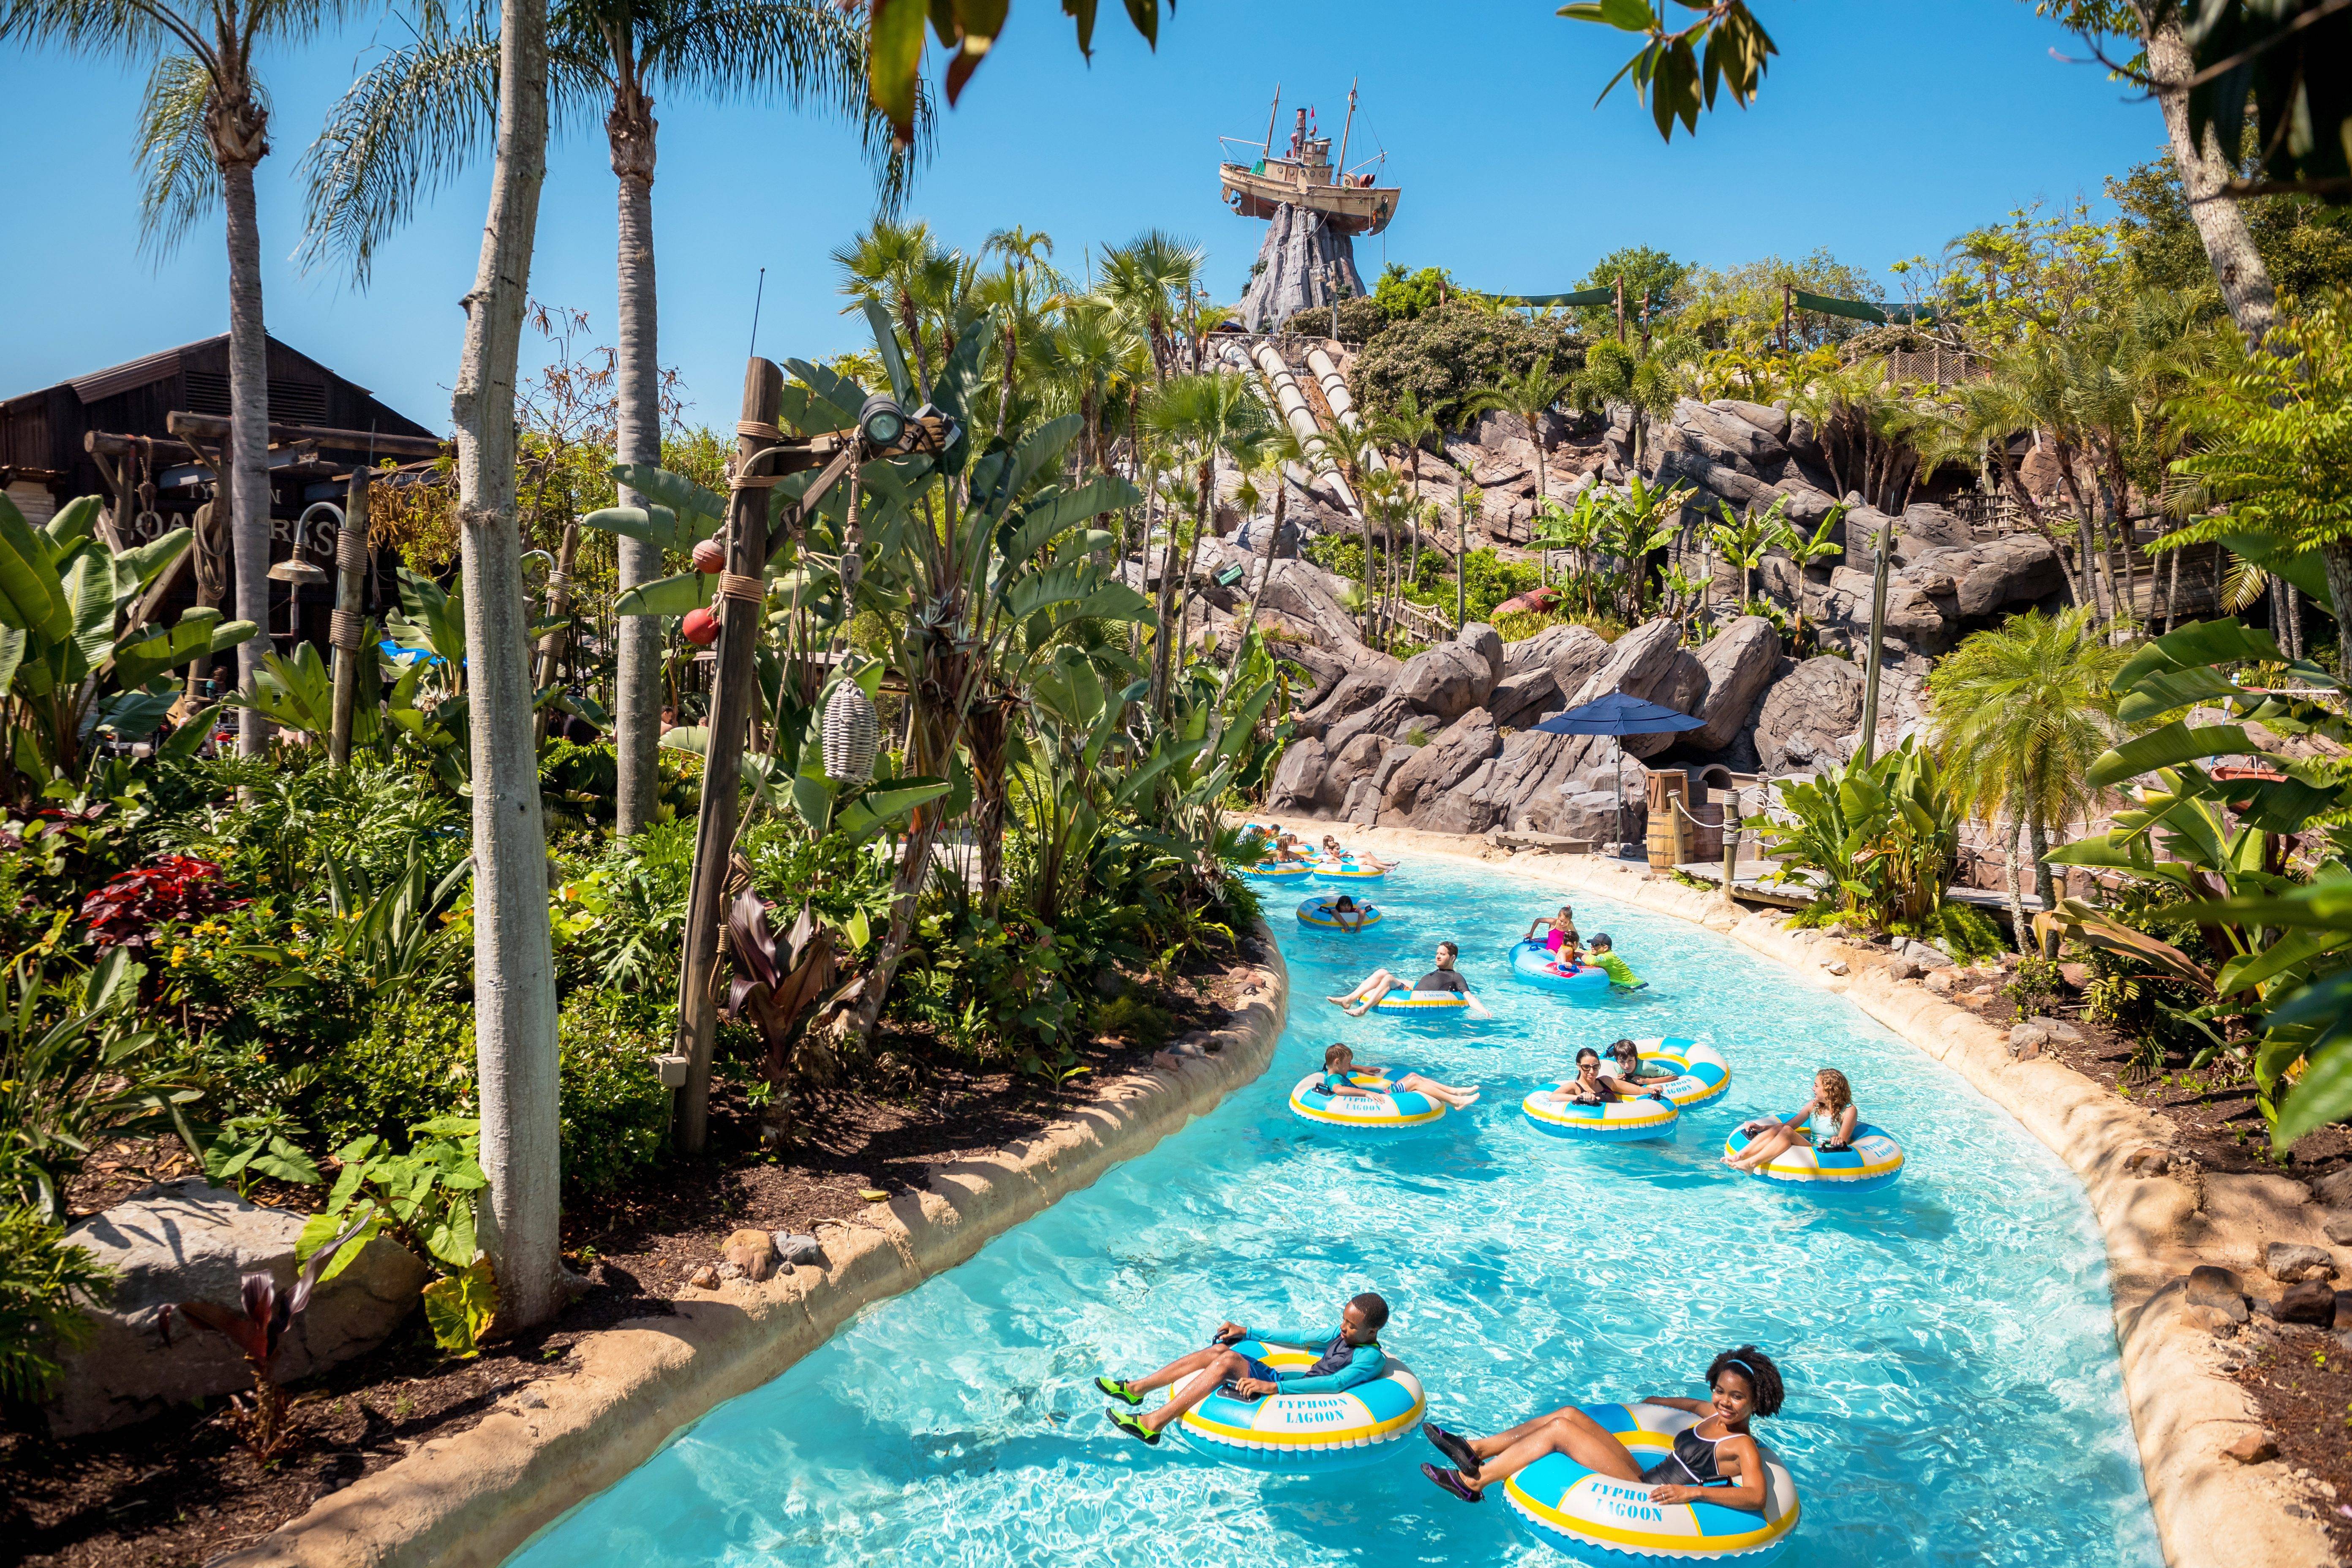 The 2-day ticket deal is available now for Typhoon Lagoon